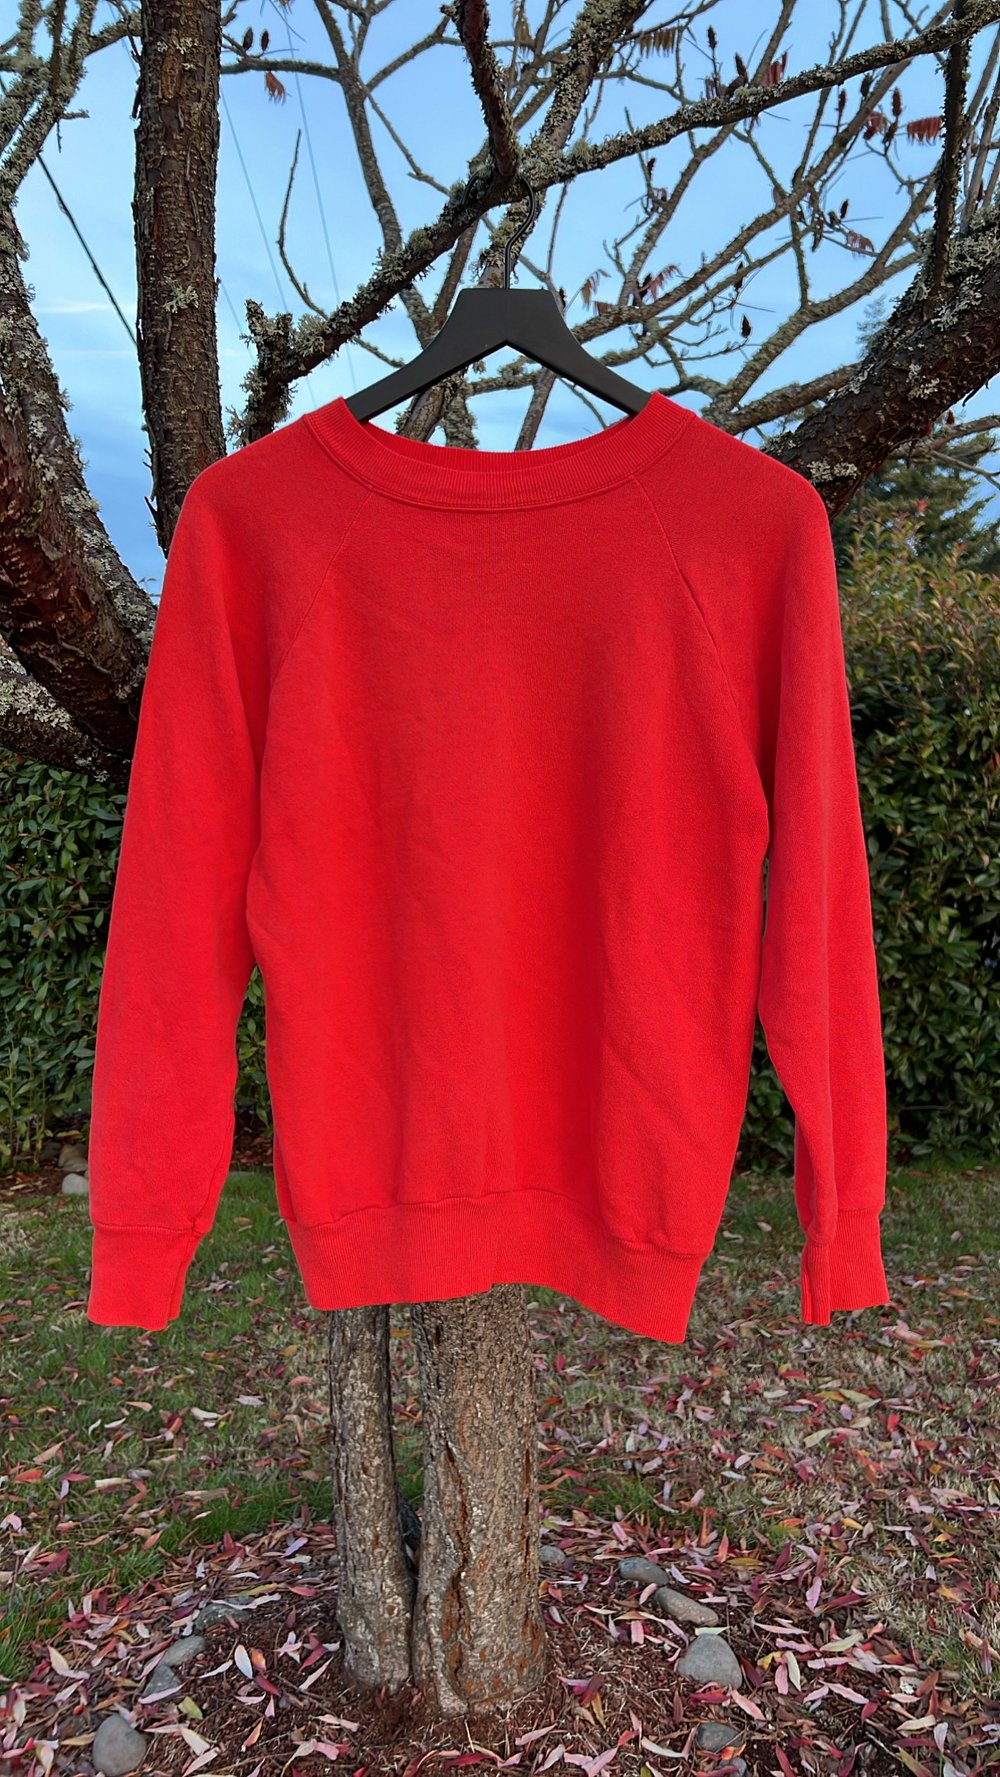 Vintage Parrill Made in USA Sweatshirt (M)